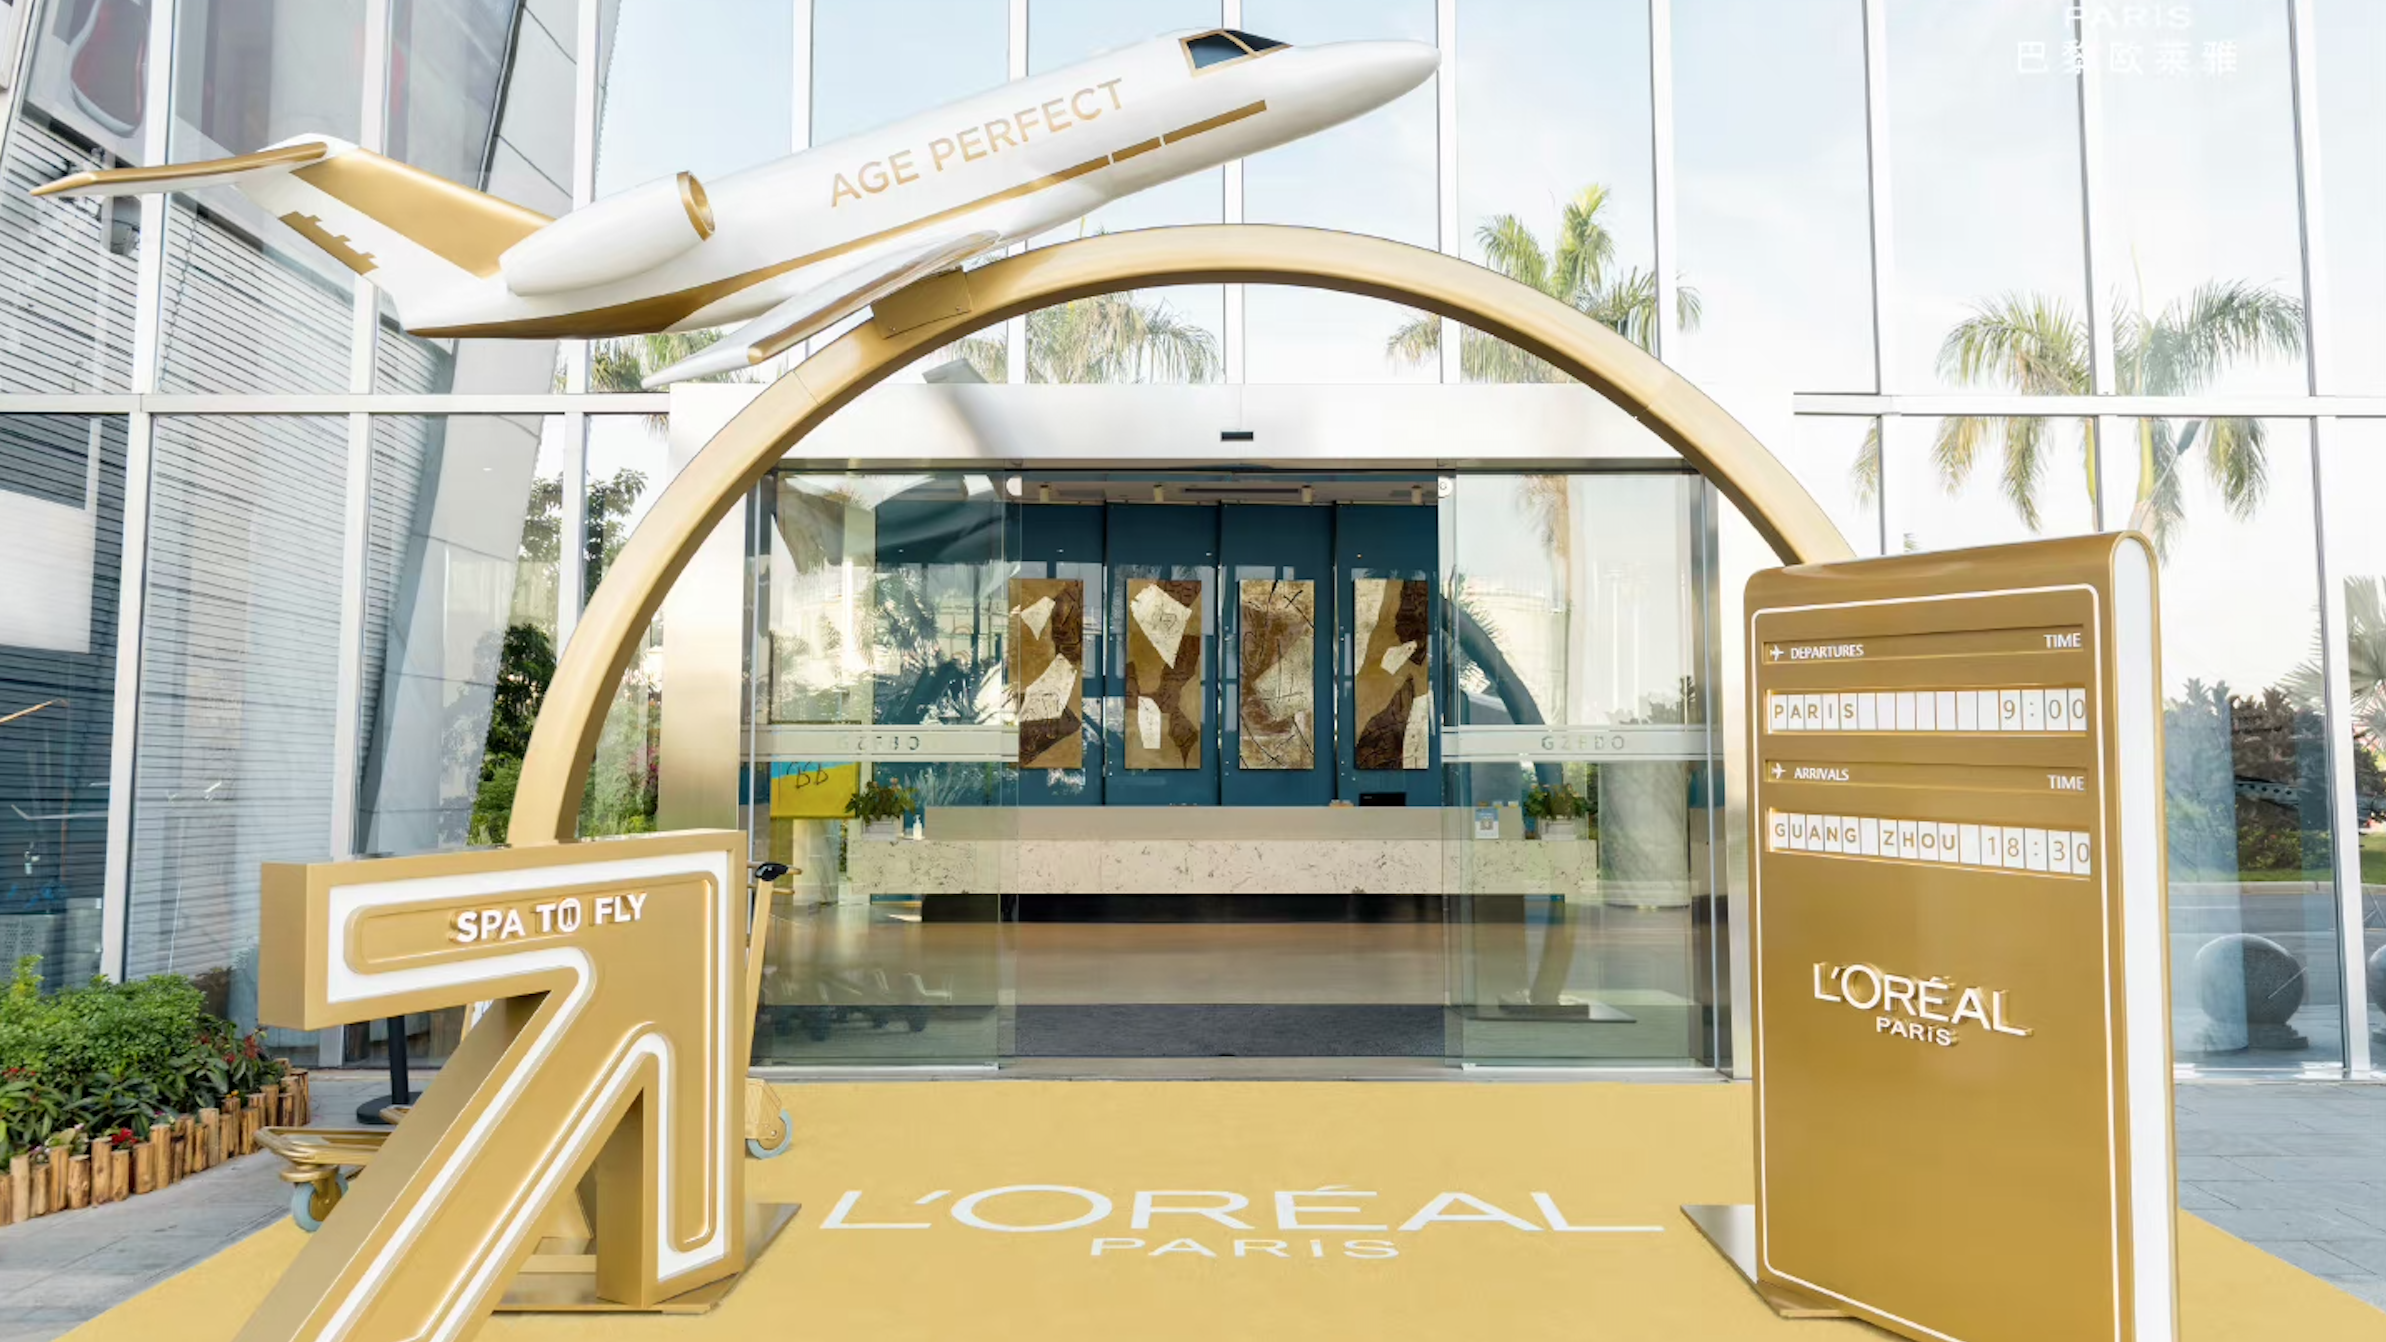 L’Oreal emerges the 1 billion RMB victor on Douyin, China’s newest beauty retail battleground